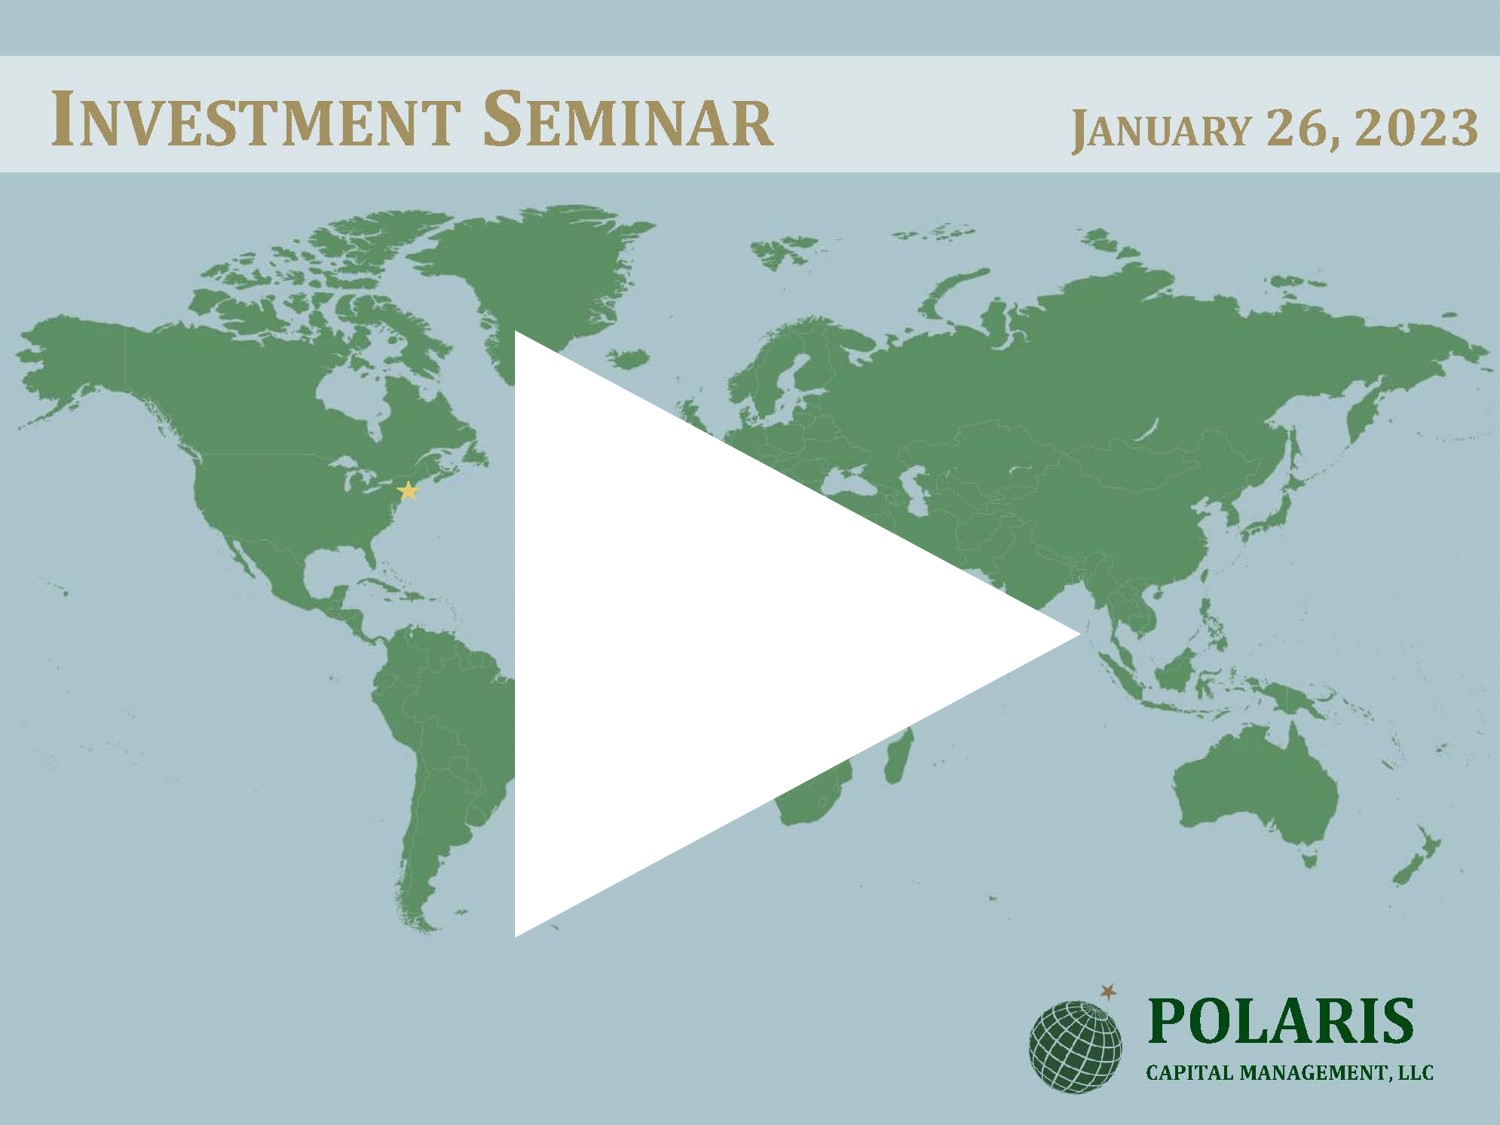 Click here to watch our 2023 Polaris Investment Seminar